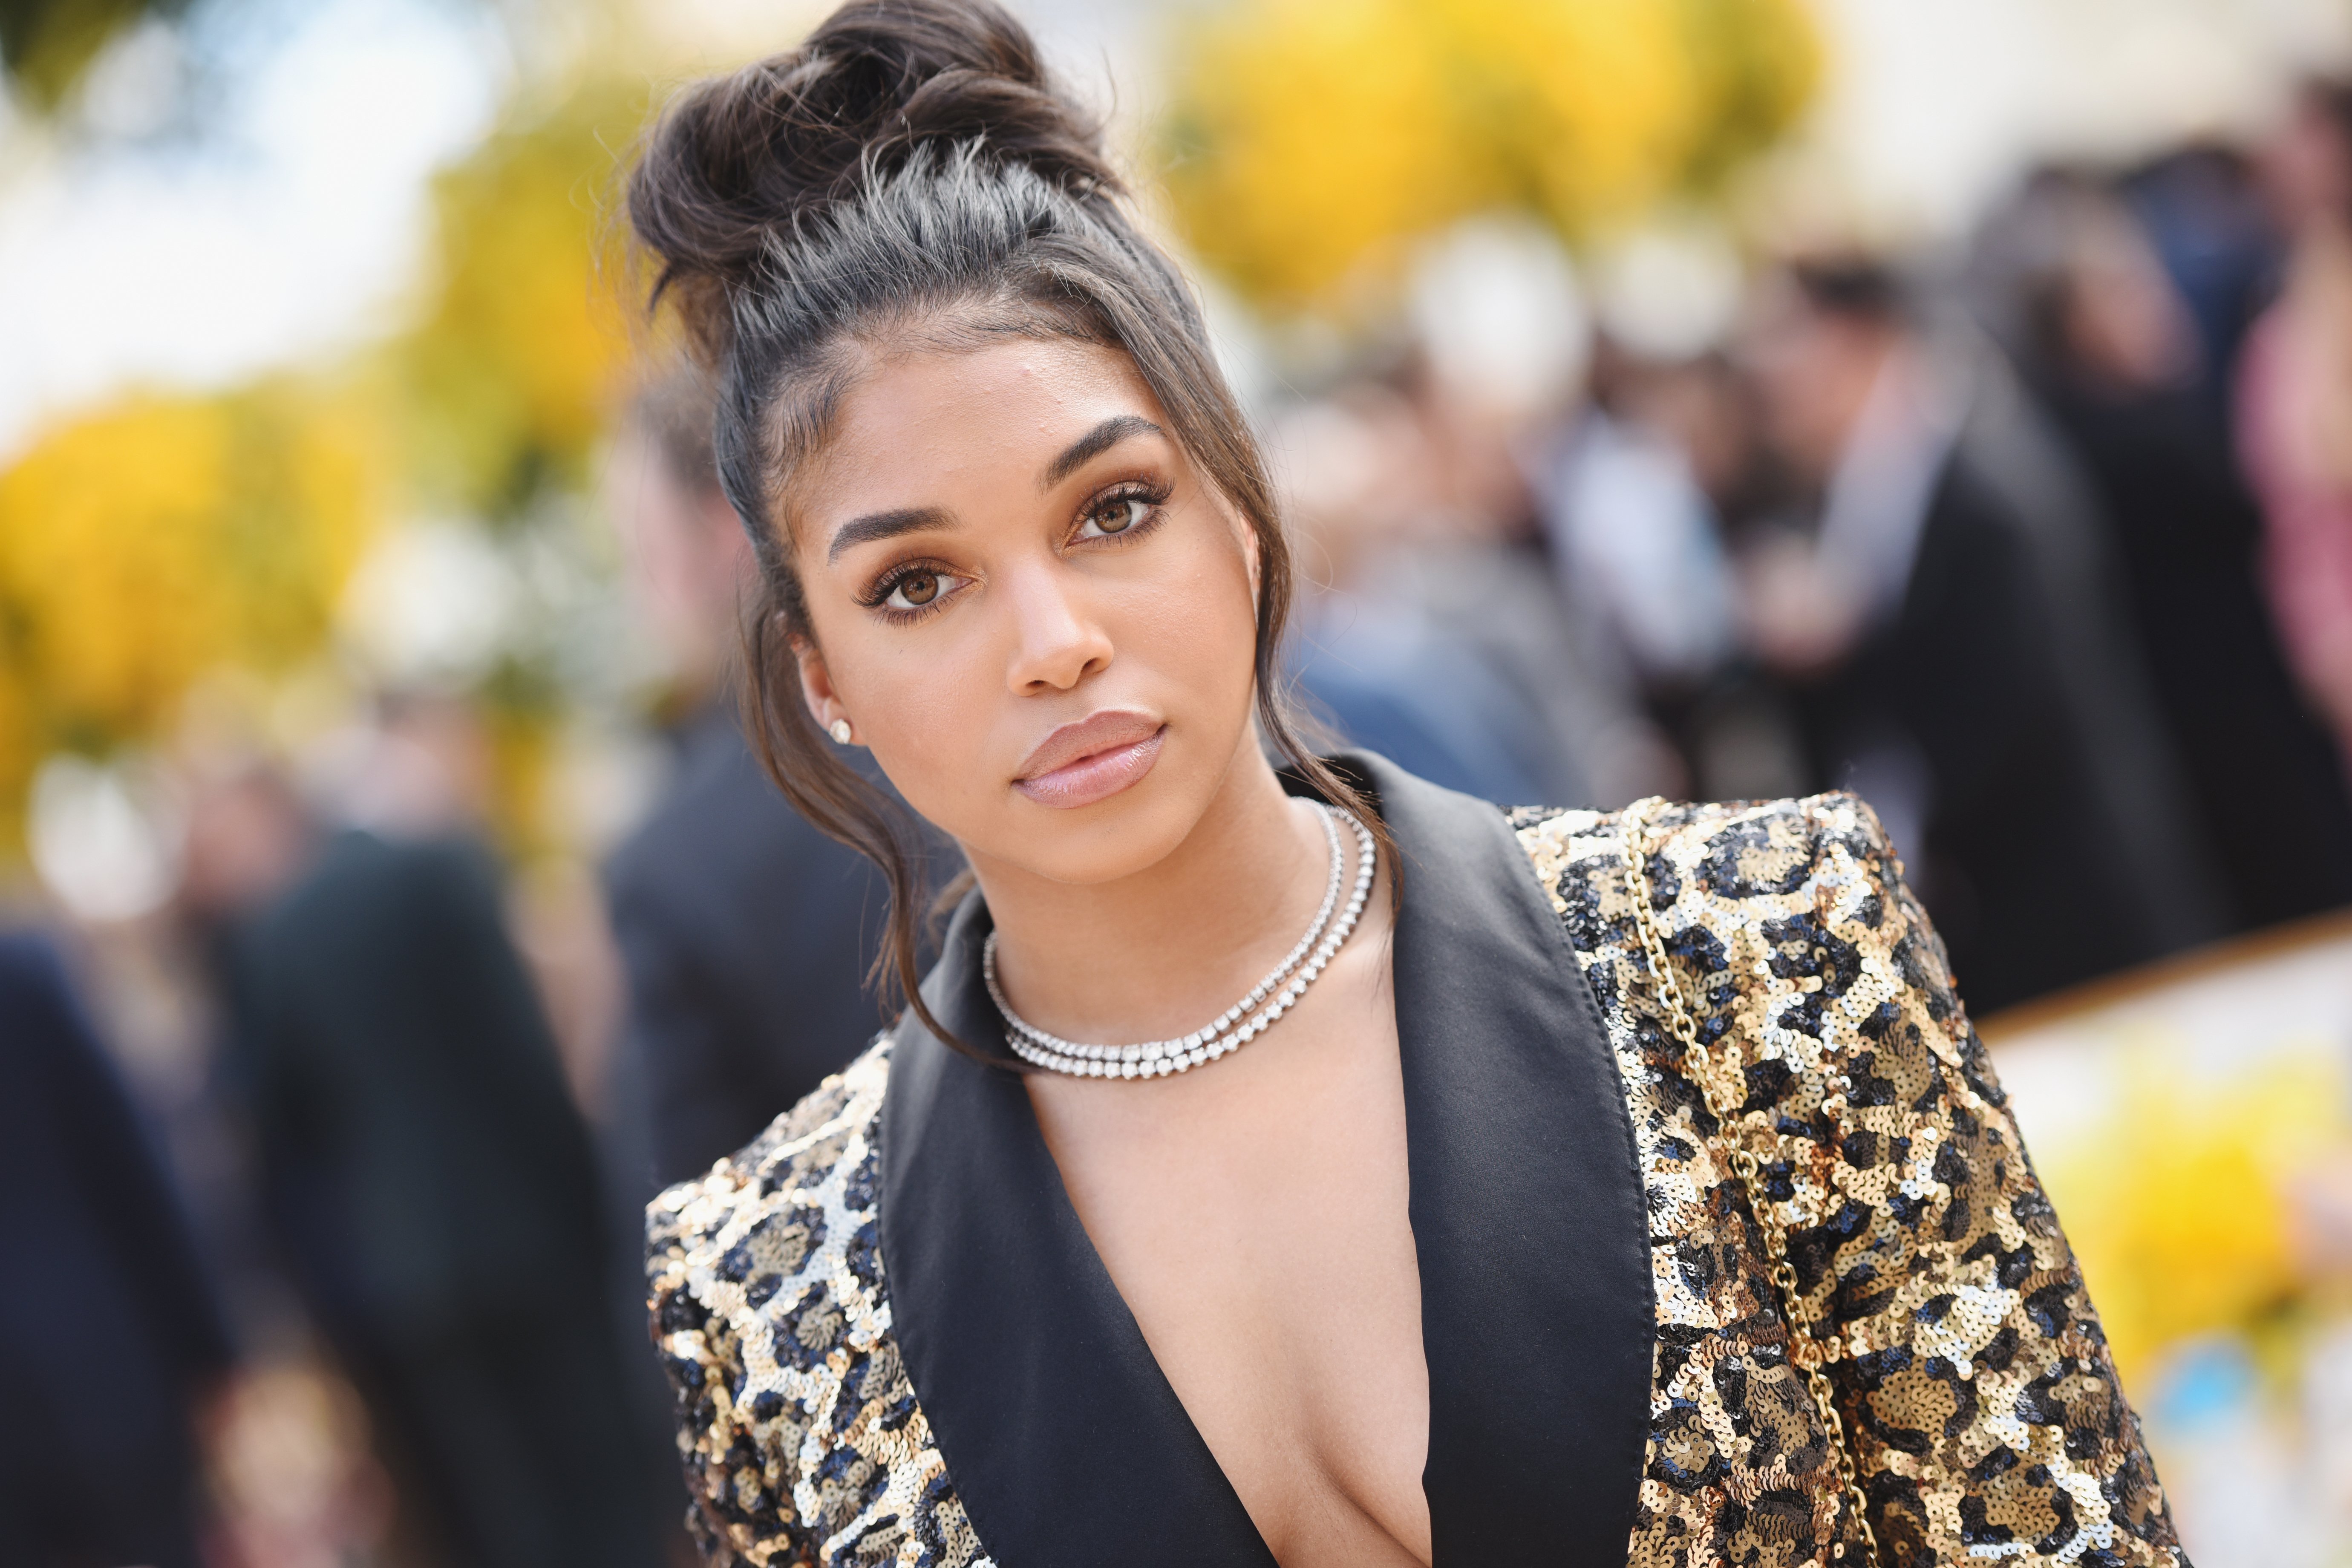 Lori Harvey attends Roc Nation's "The Brunch" on February 9, 2019. | Source: Getty Images